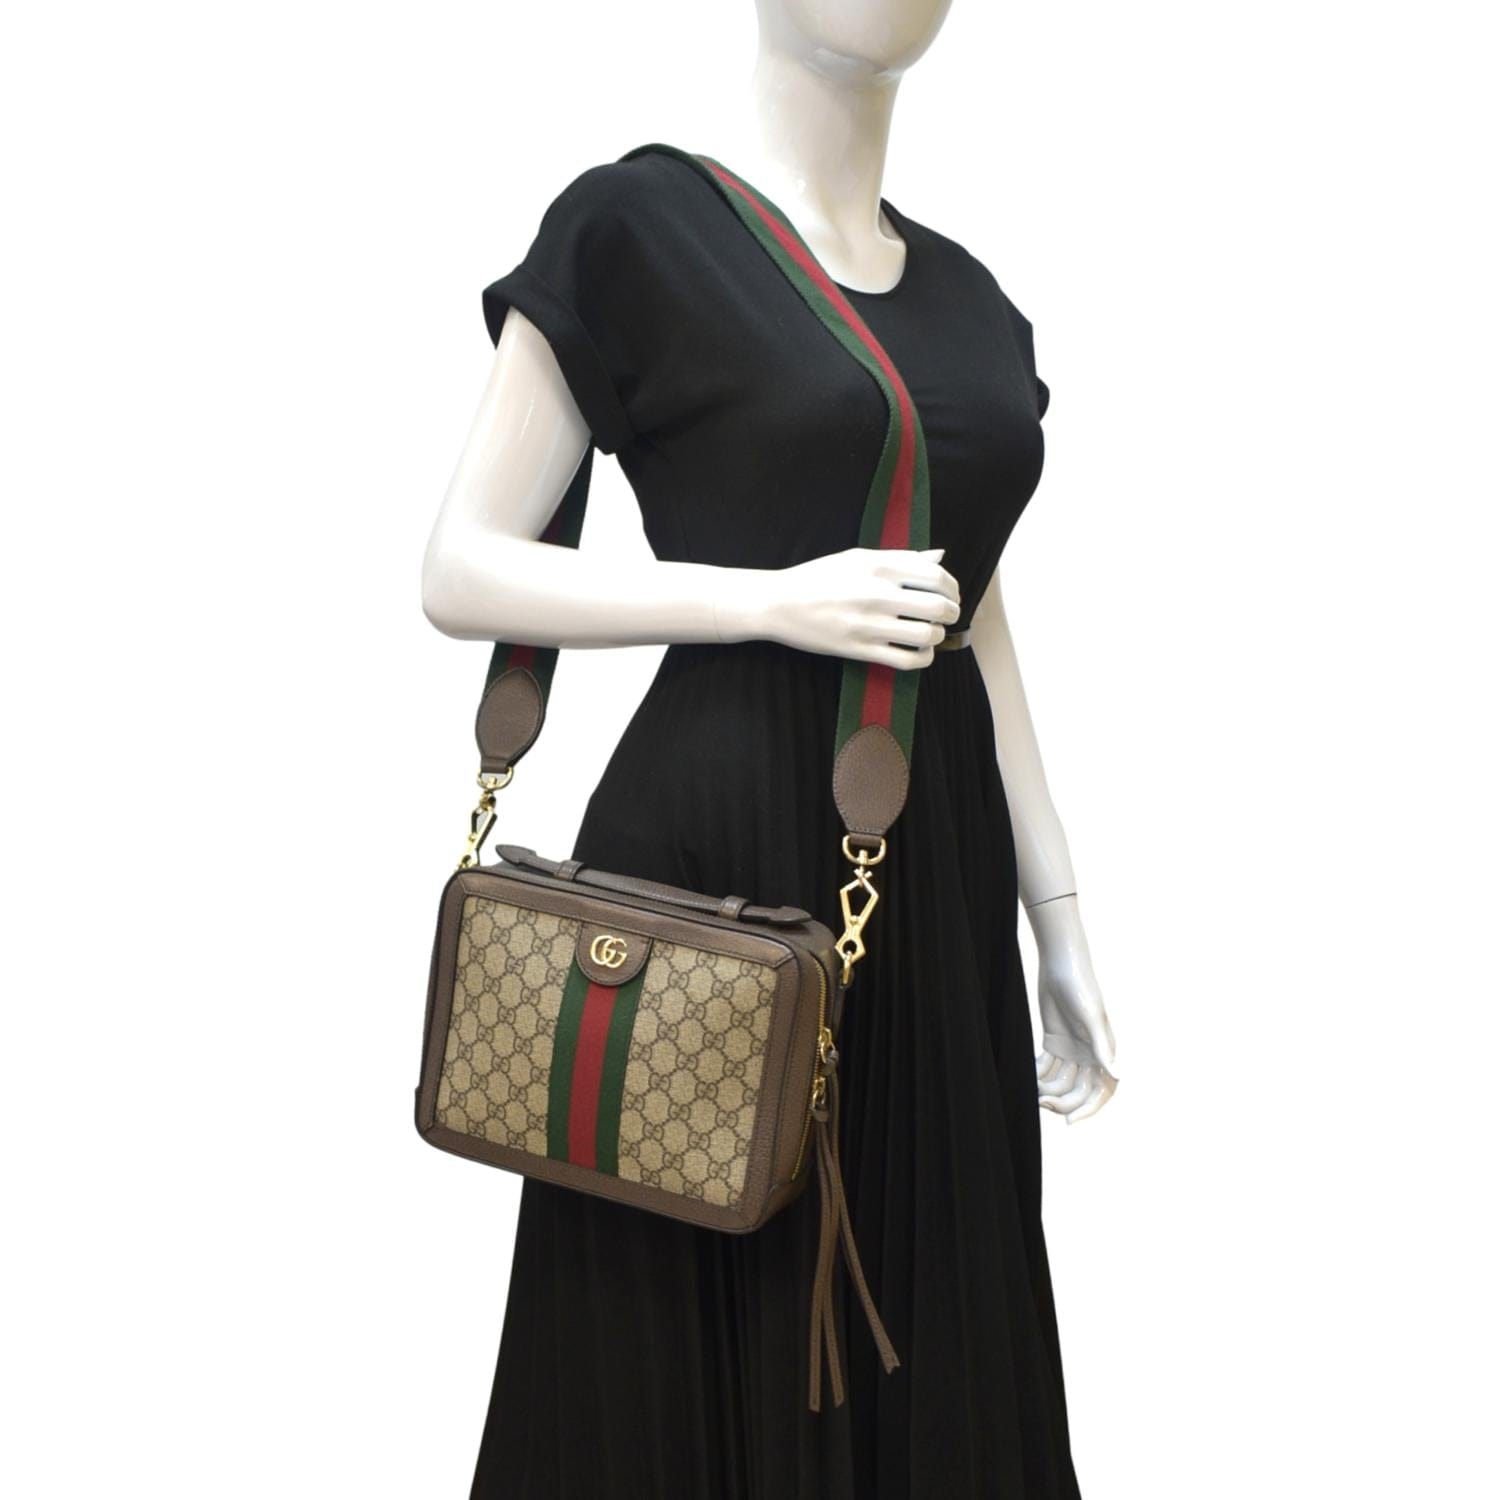 Gucci - Ophidia Small Gg-supreme Canvas Shoulder Bag - Womens - Beige